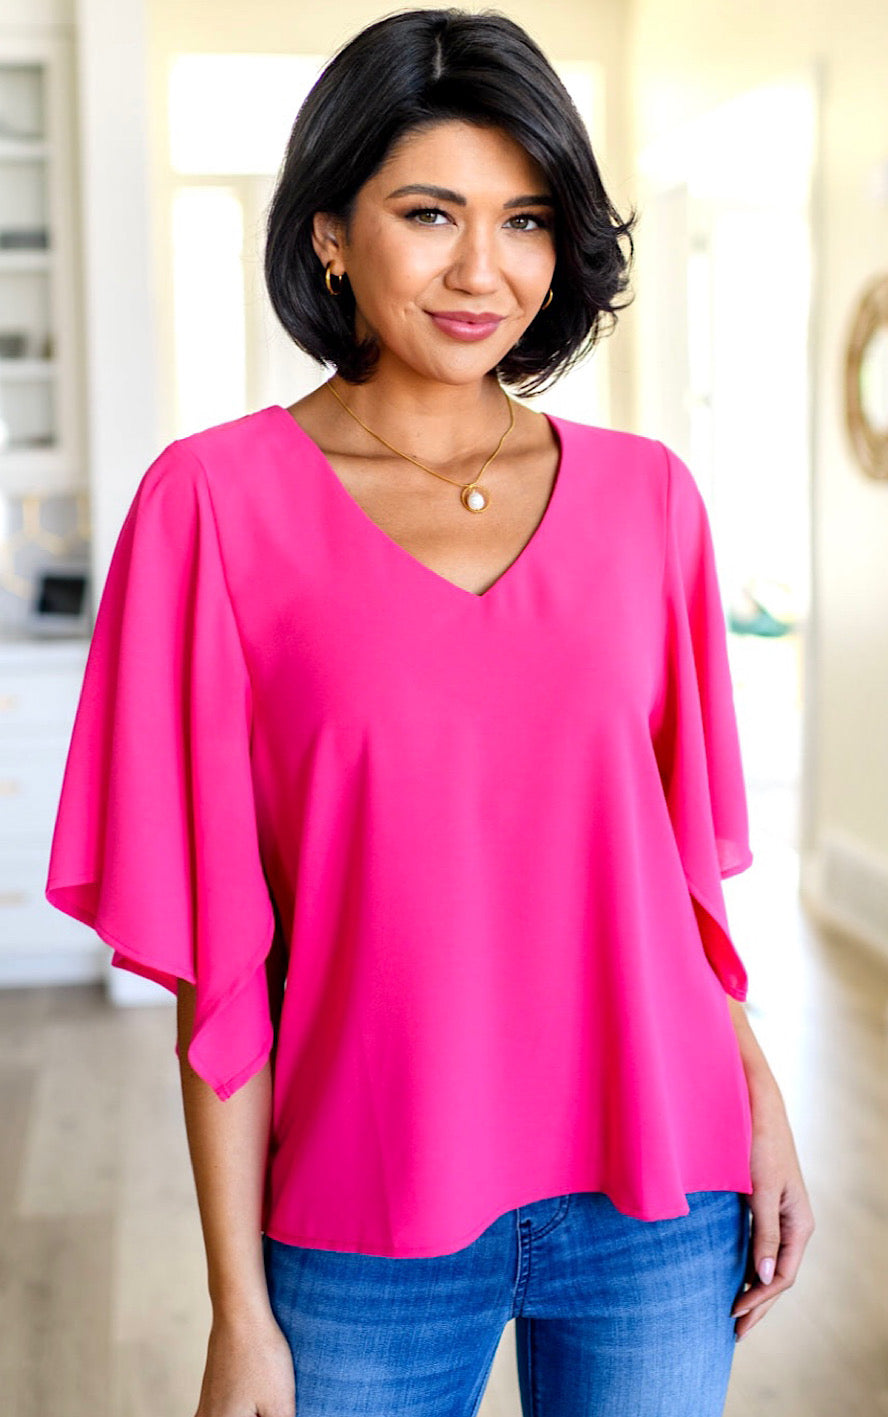 Latest Crush Pink V Neck Top, SMALL left!